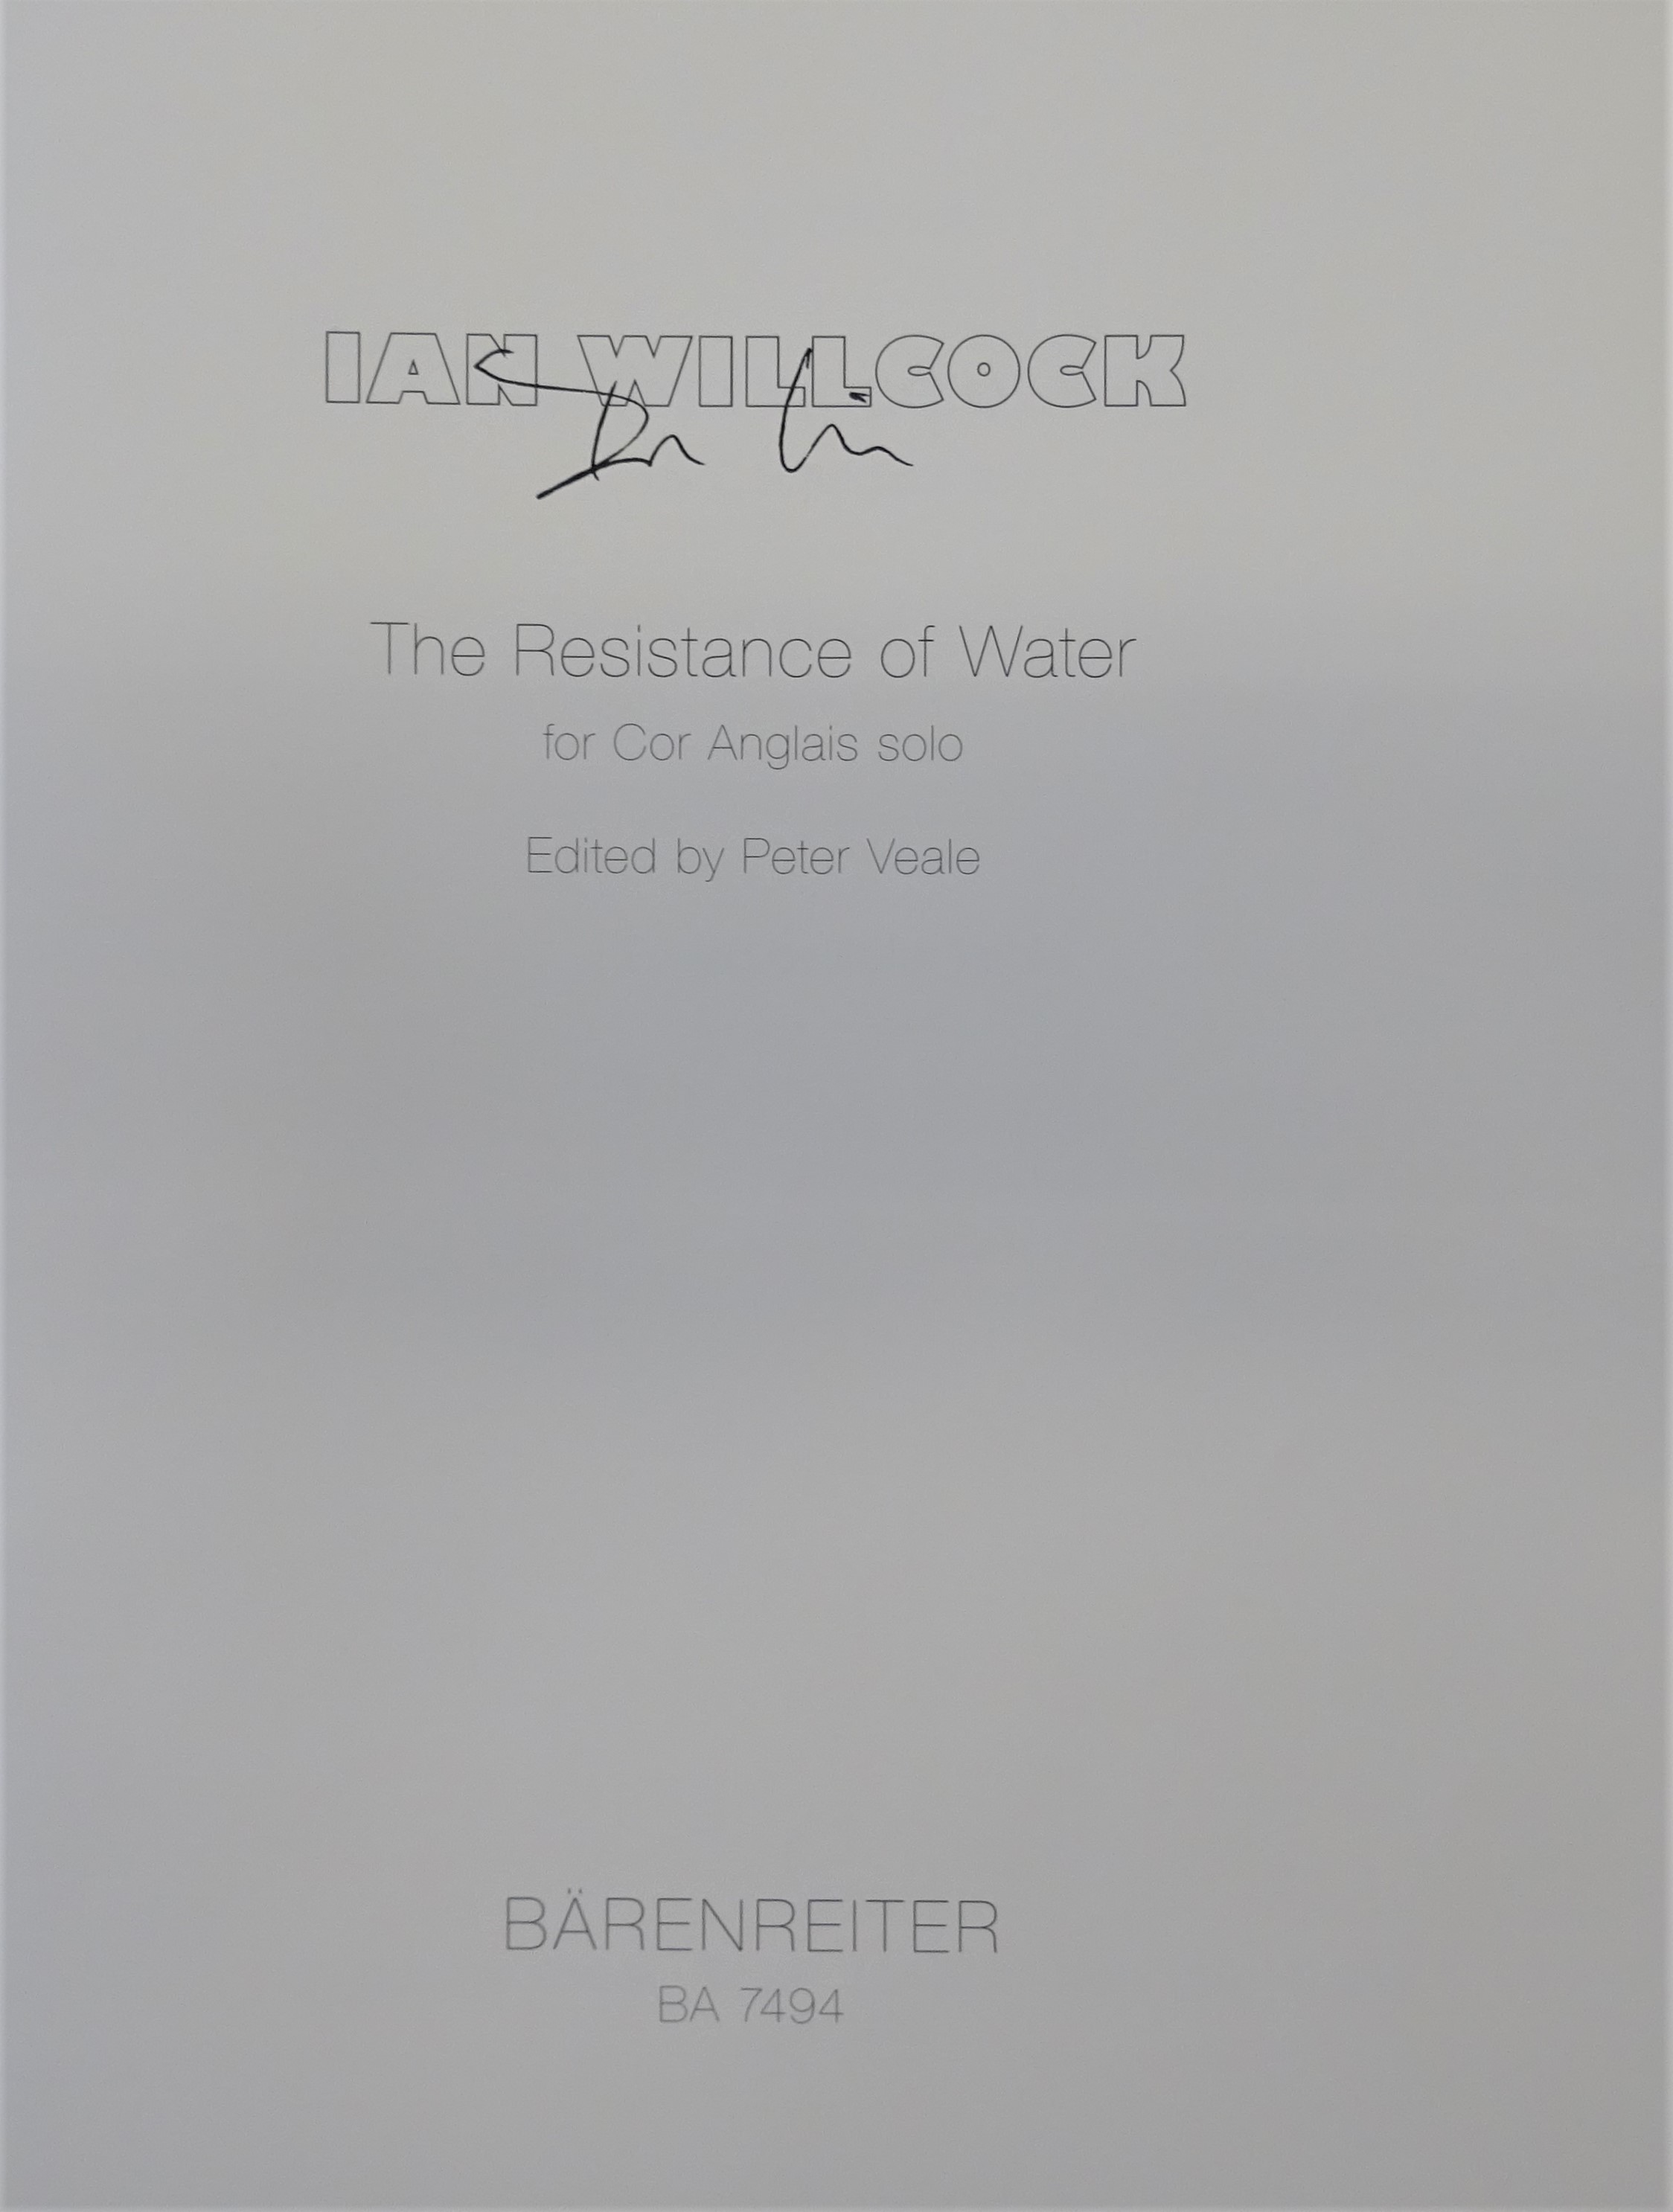 I. Willcock: The resistance of water<br>für Engl. Horn solo